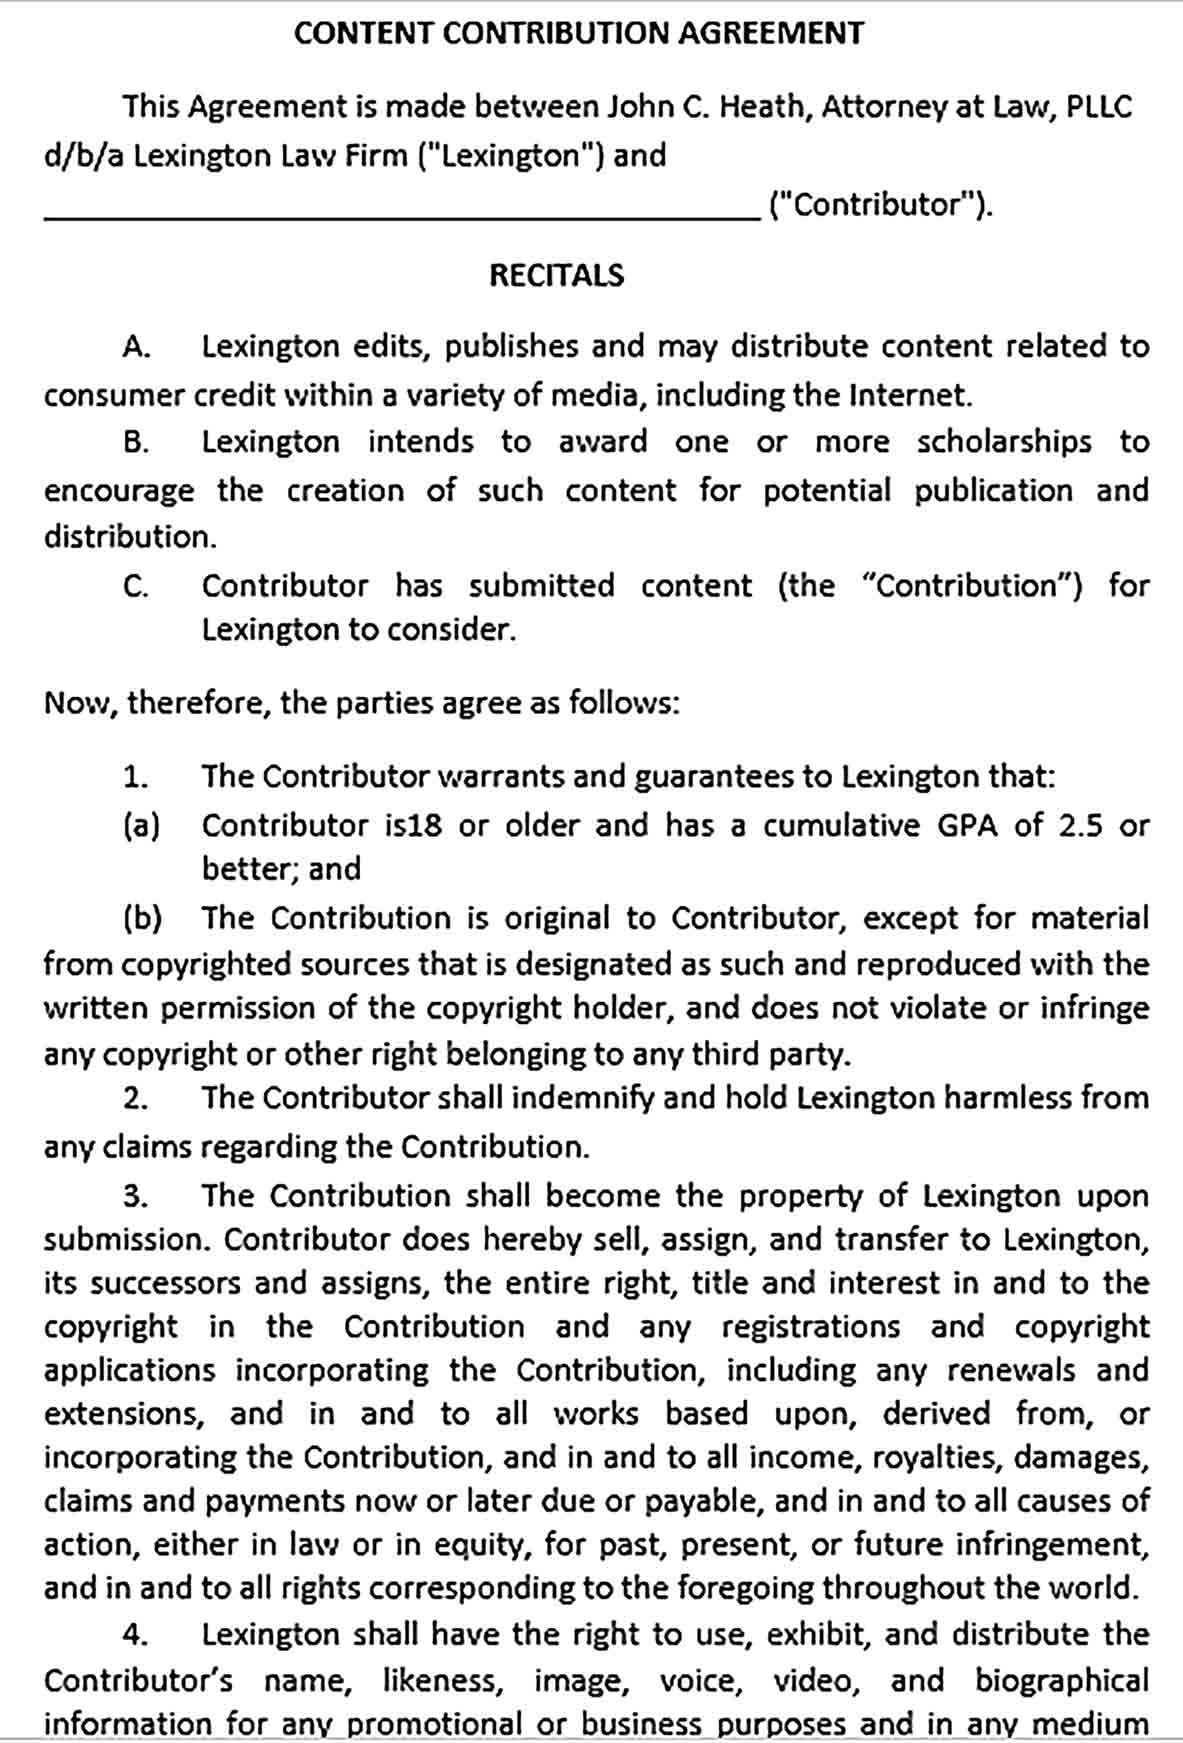 Sample Content Contribution Agreement